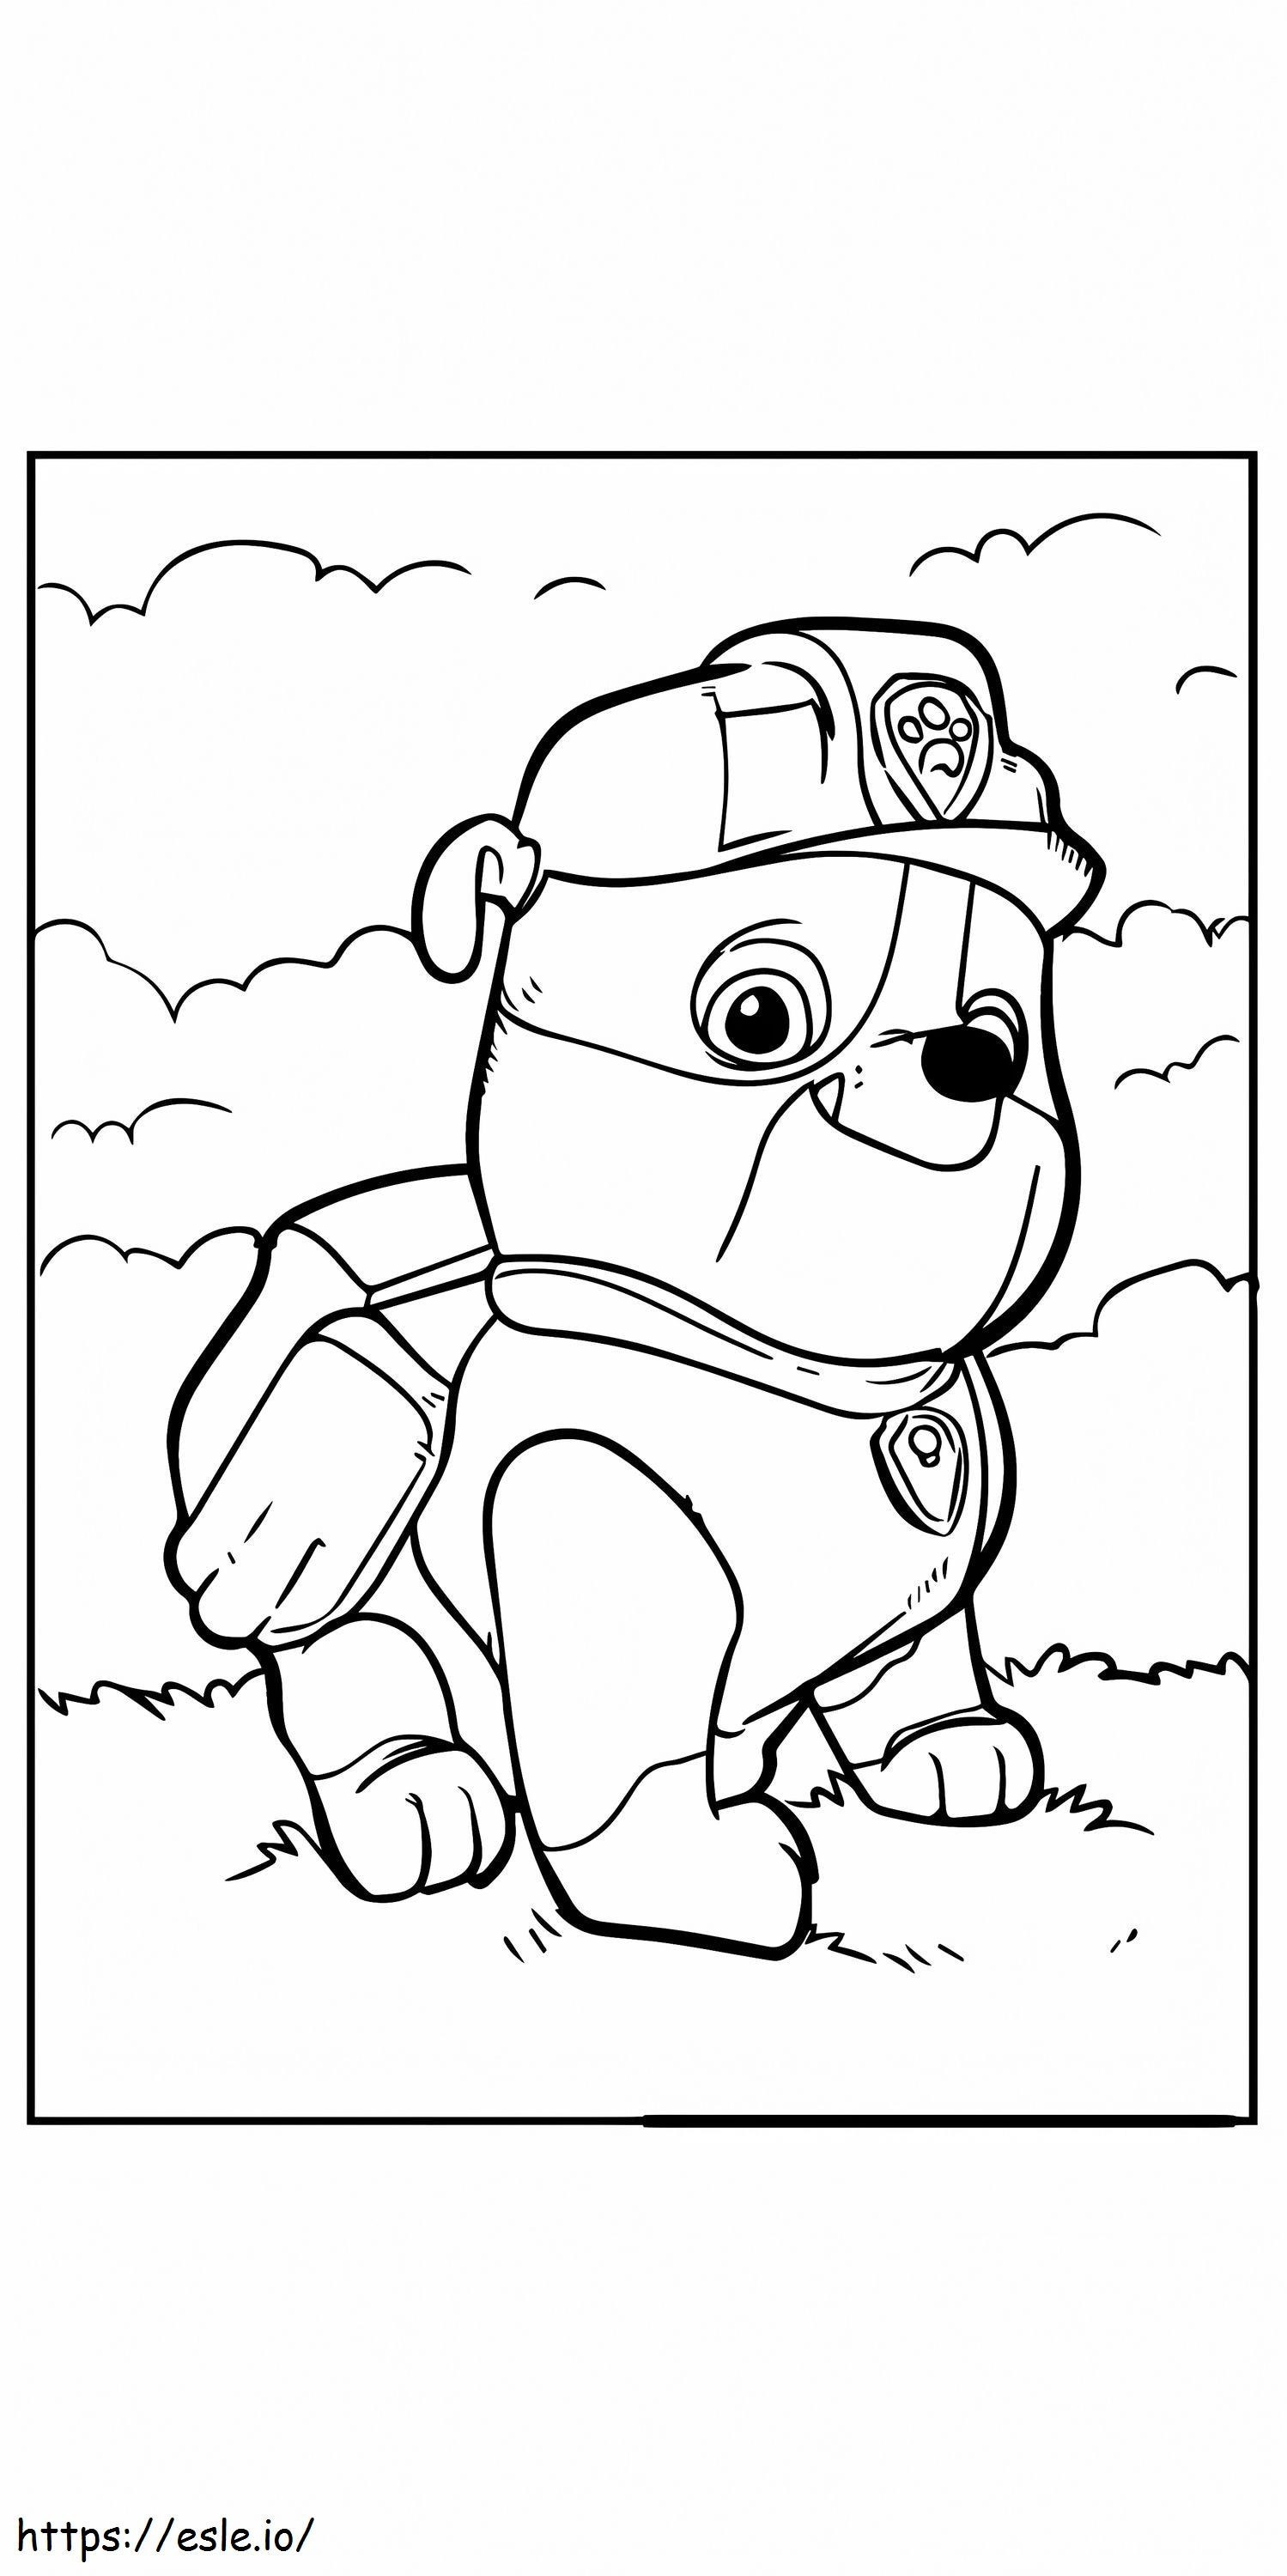 Paw Patrol Rubble Drawing coloring page